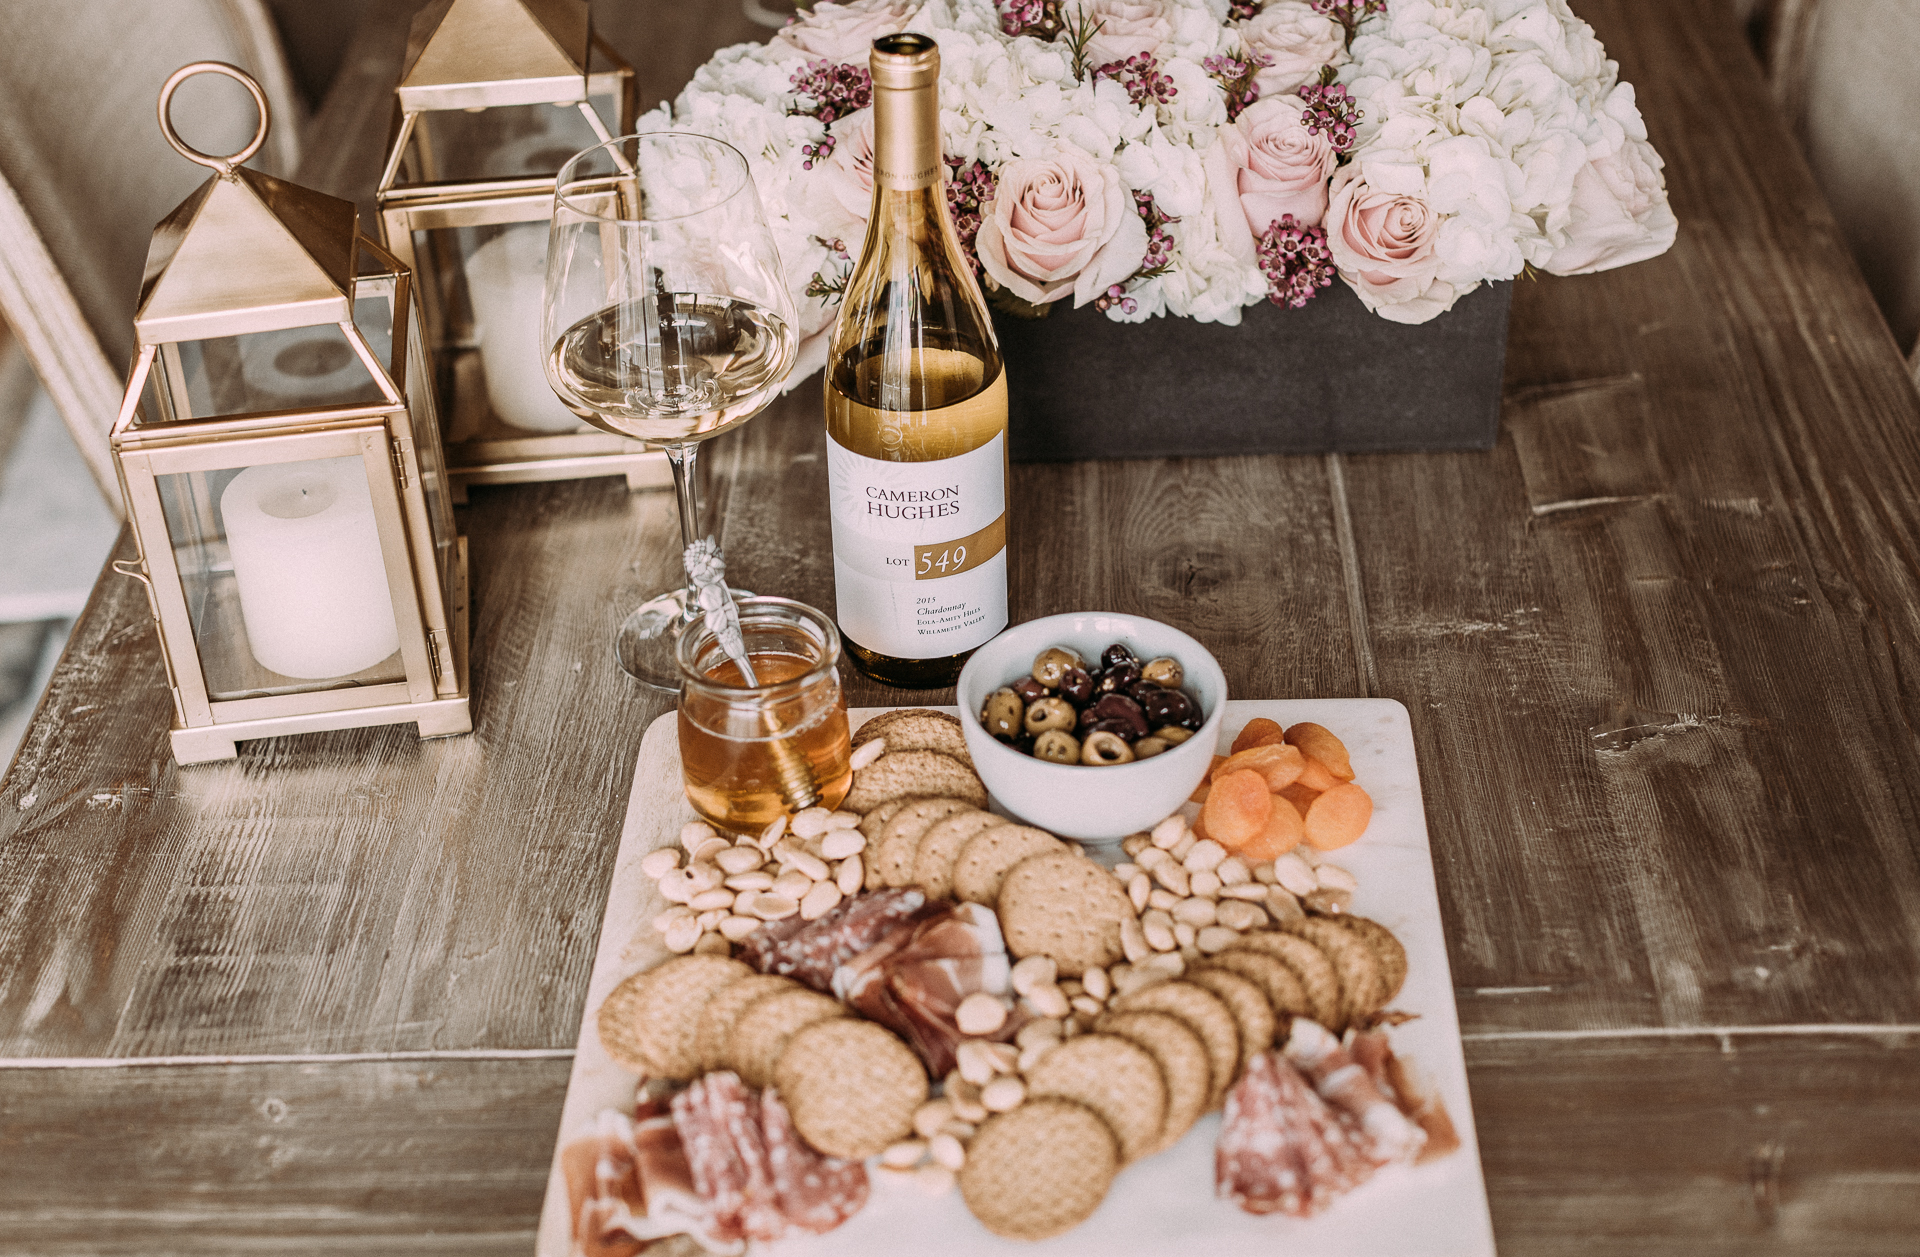 A charcuterie assortment paired with Cameron Hughes Wine